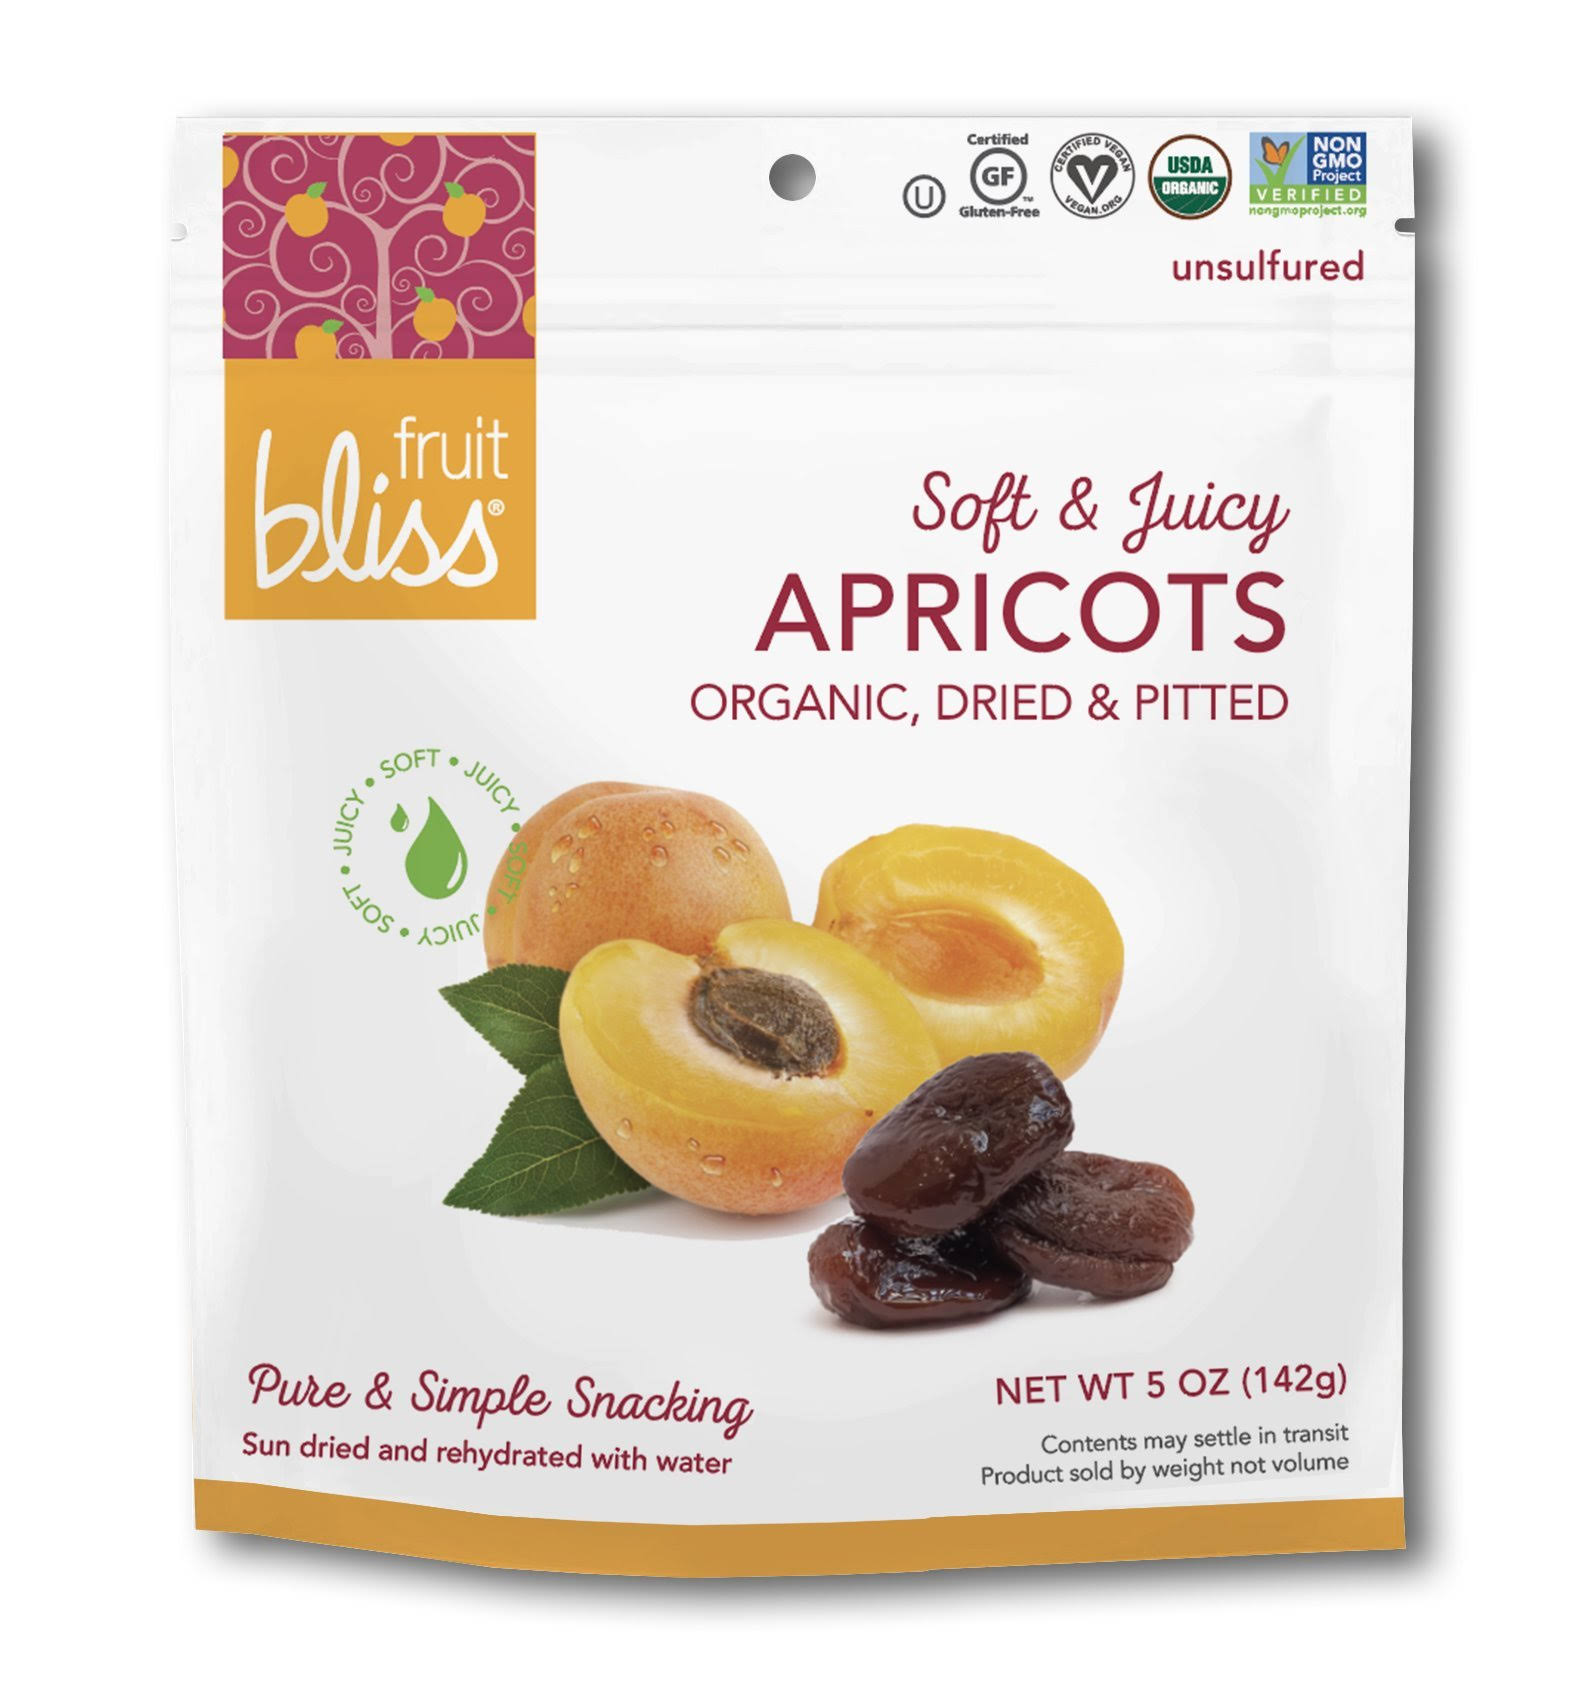 Fruit Bliss Apricots, Organic, Dried & Pitted - 5 oz